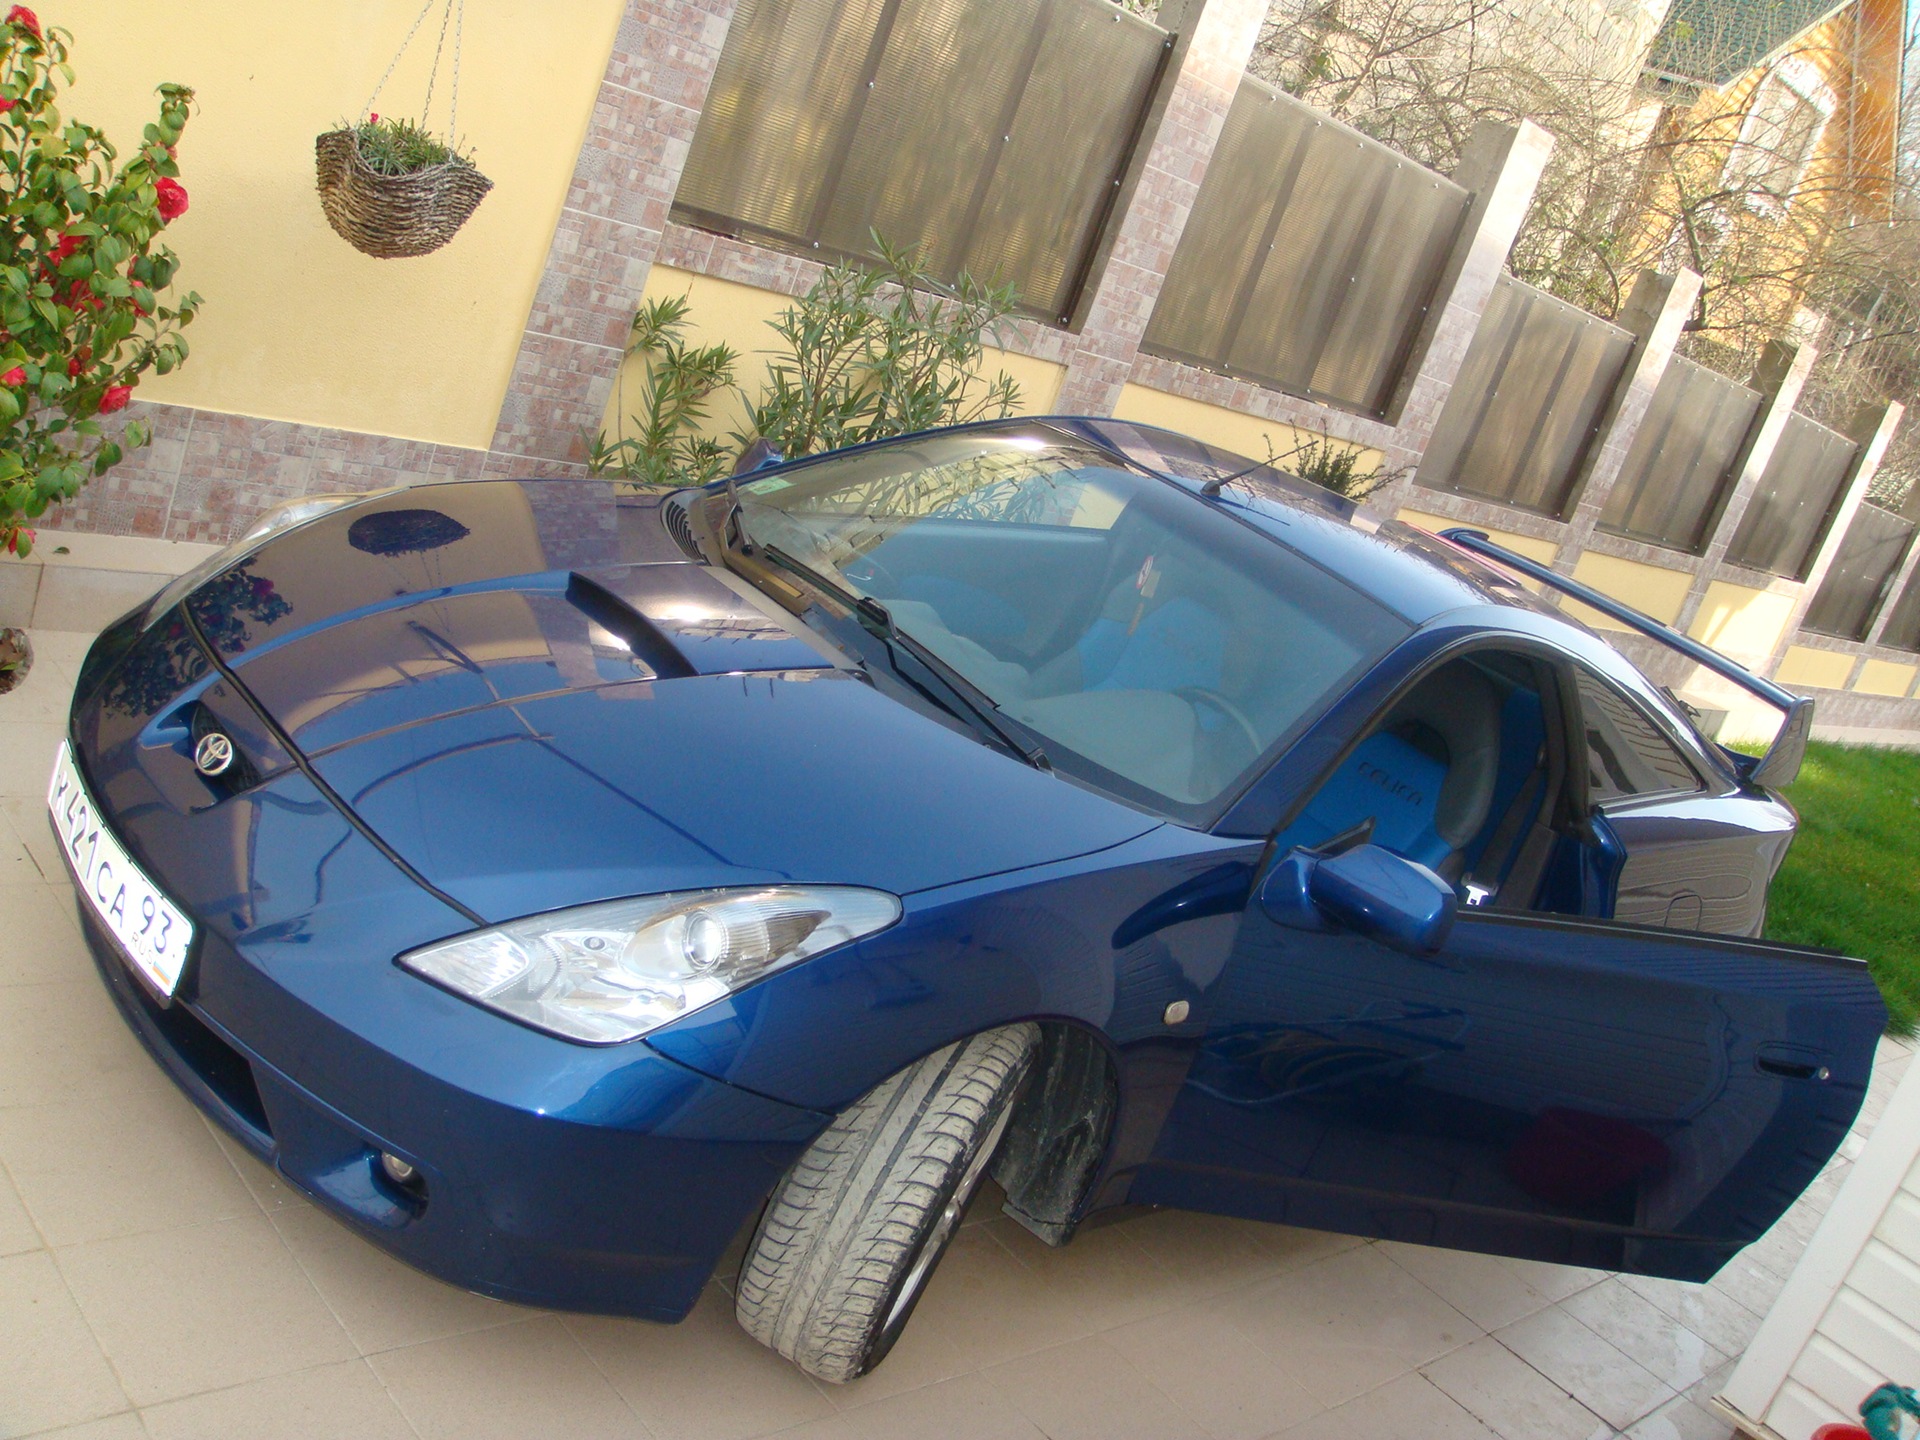 Purchase and installation of a turbojet spoiler - Toyota Celica 18 L 2000